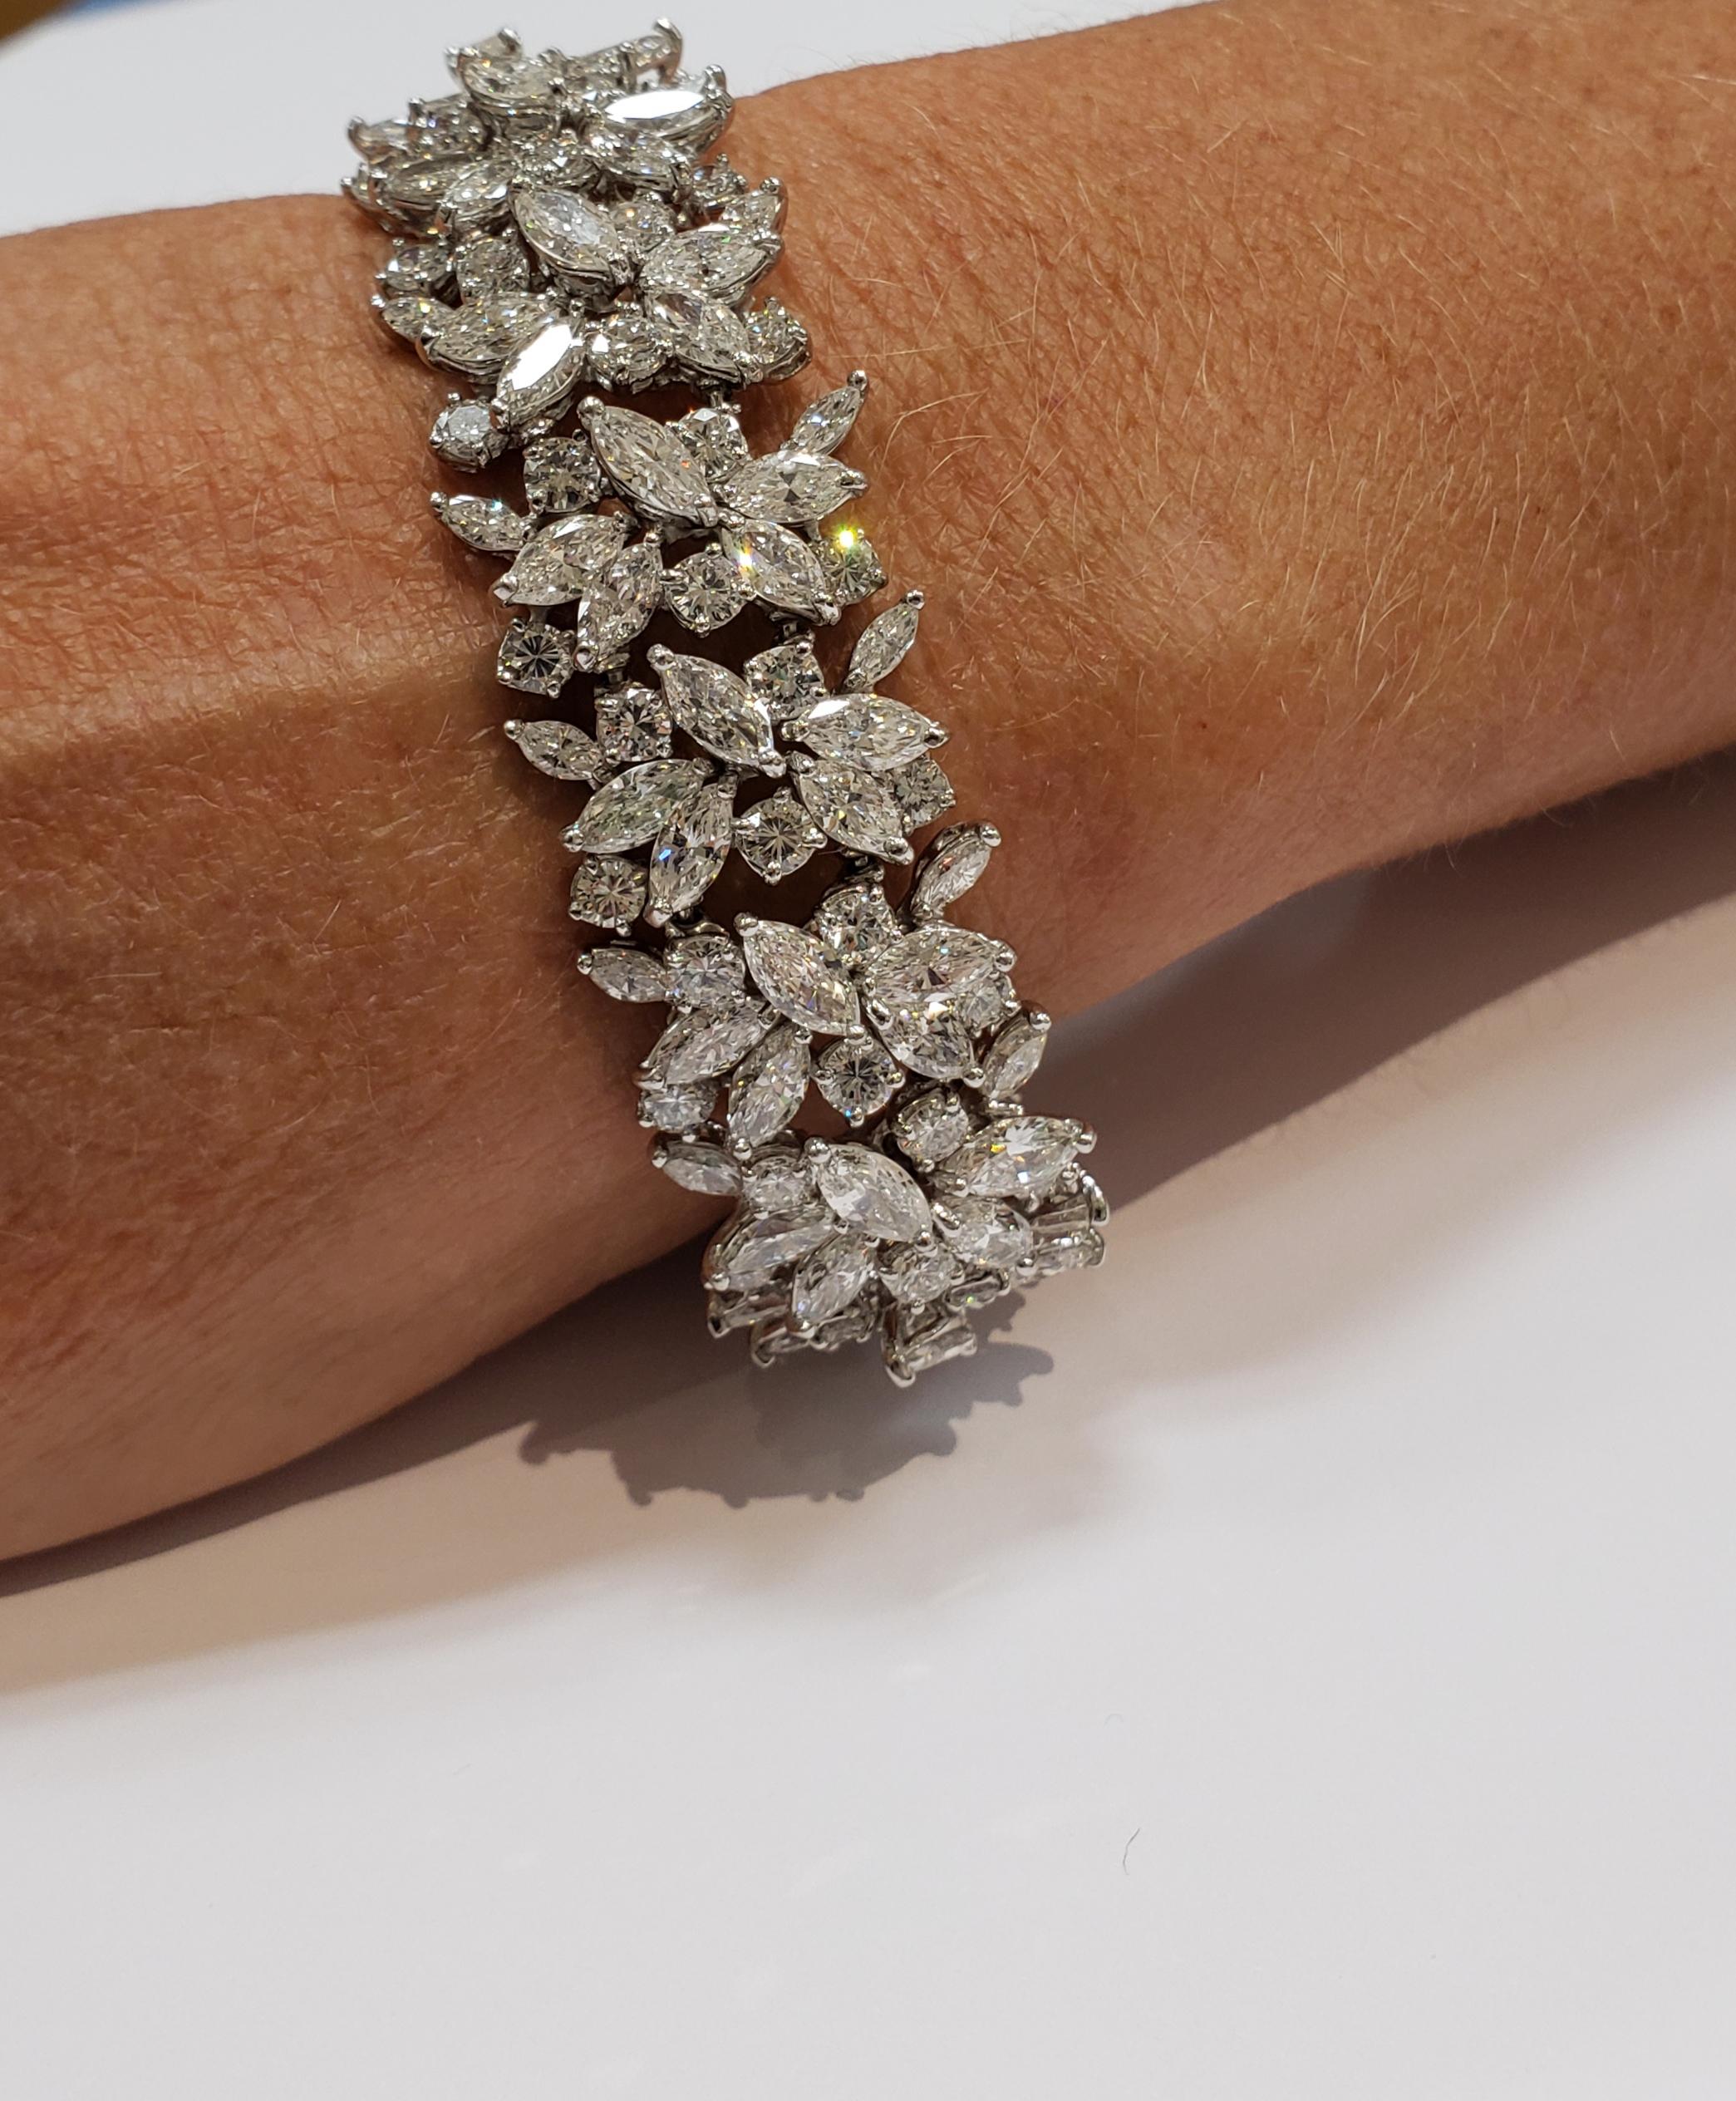 A gorgeous platinum, marquise and round diamond cocktail bracelet.
Approximately 28 carats of prong set diamonds, in a floral like design.
Bracelet is from mid-century, late 1950's-mid 1960's.
An elegant look from a time gone by.
Length is 7.5